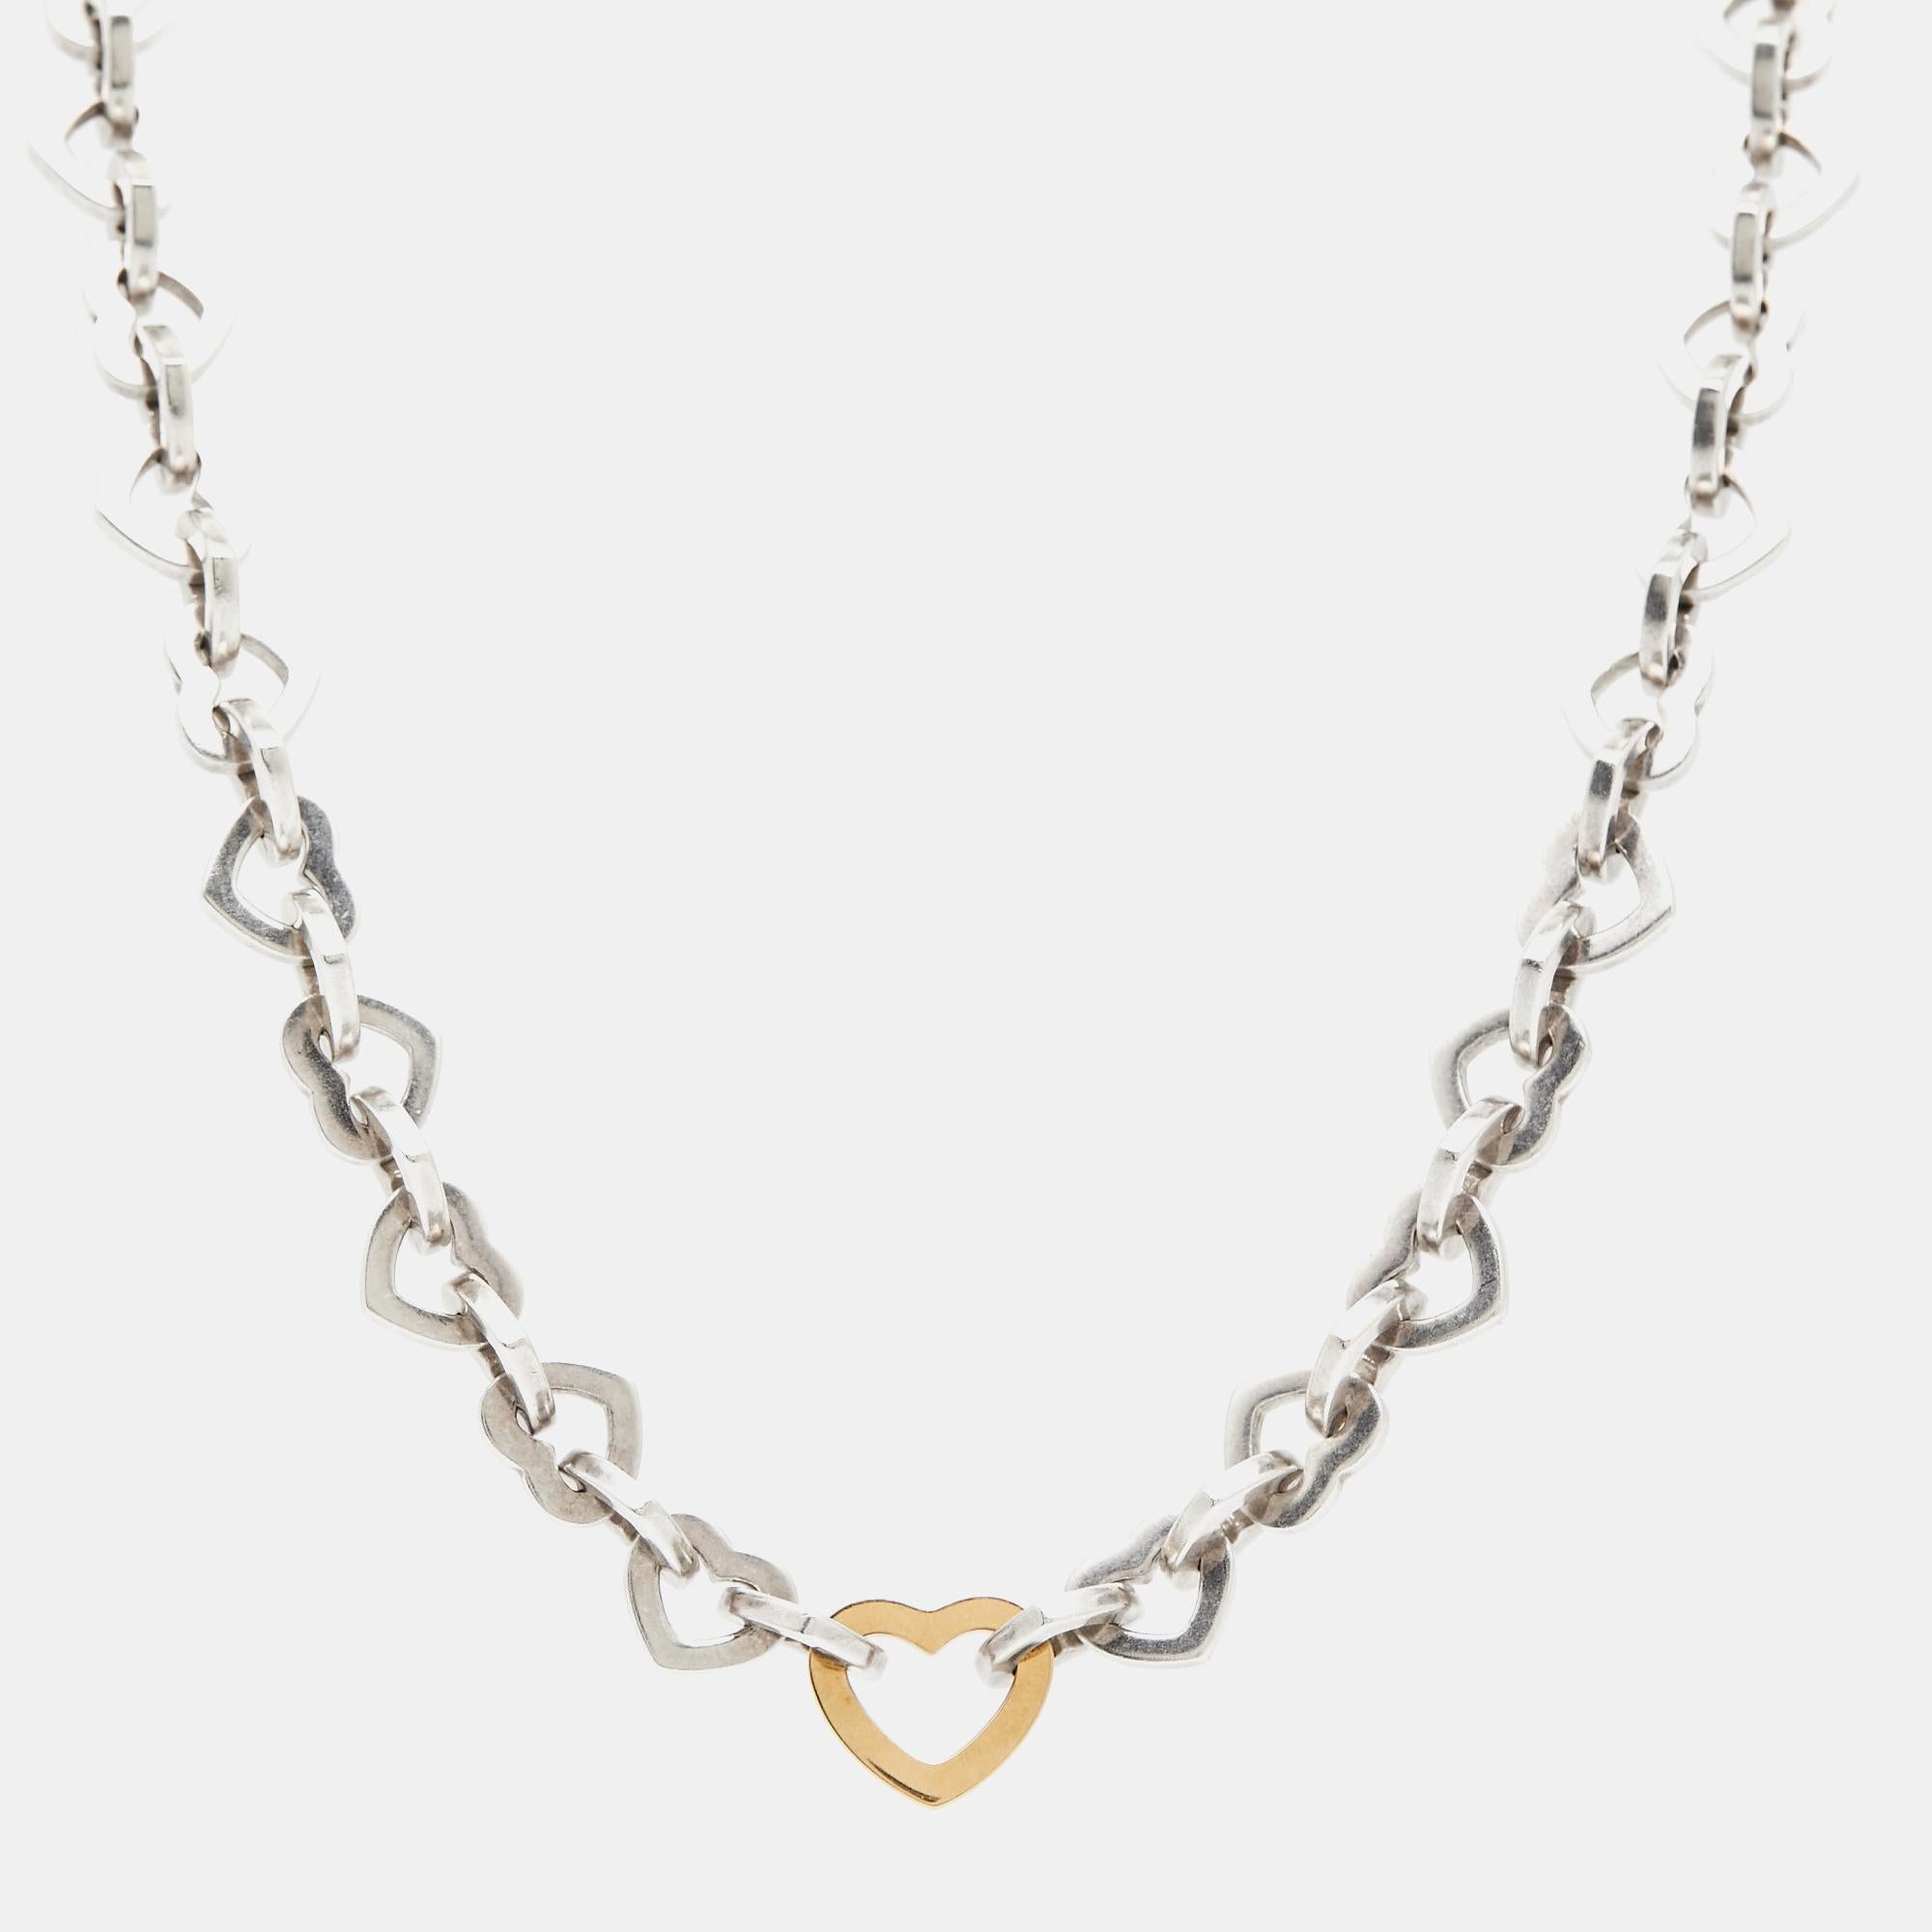 Contemporary Tiffany & Co. Heart Link Sterling Silver 18k Yellow Gold Necklace